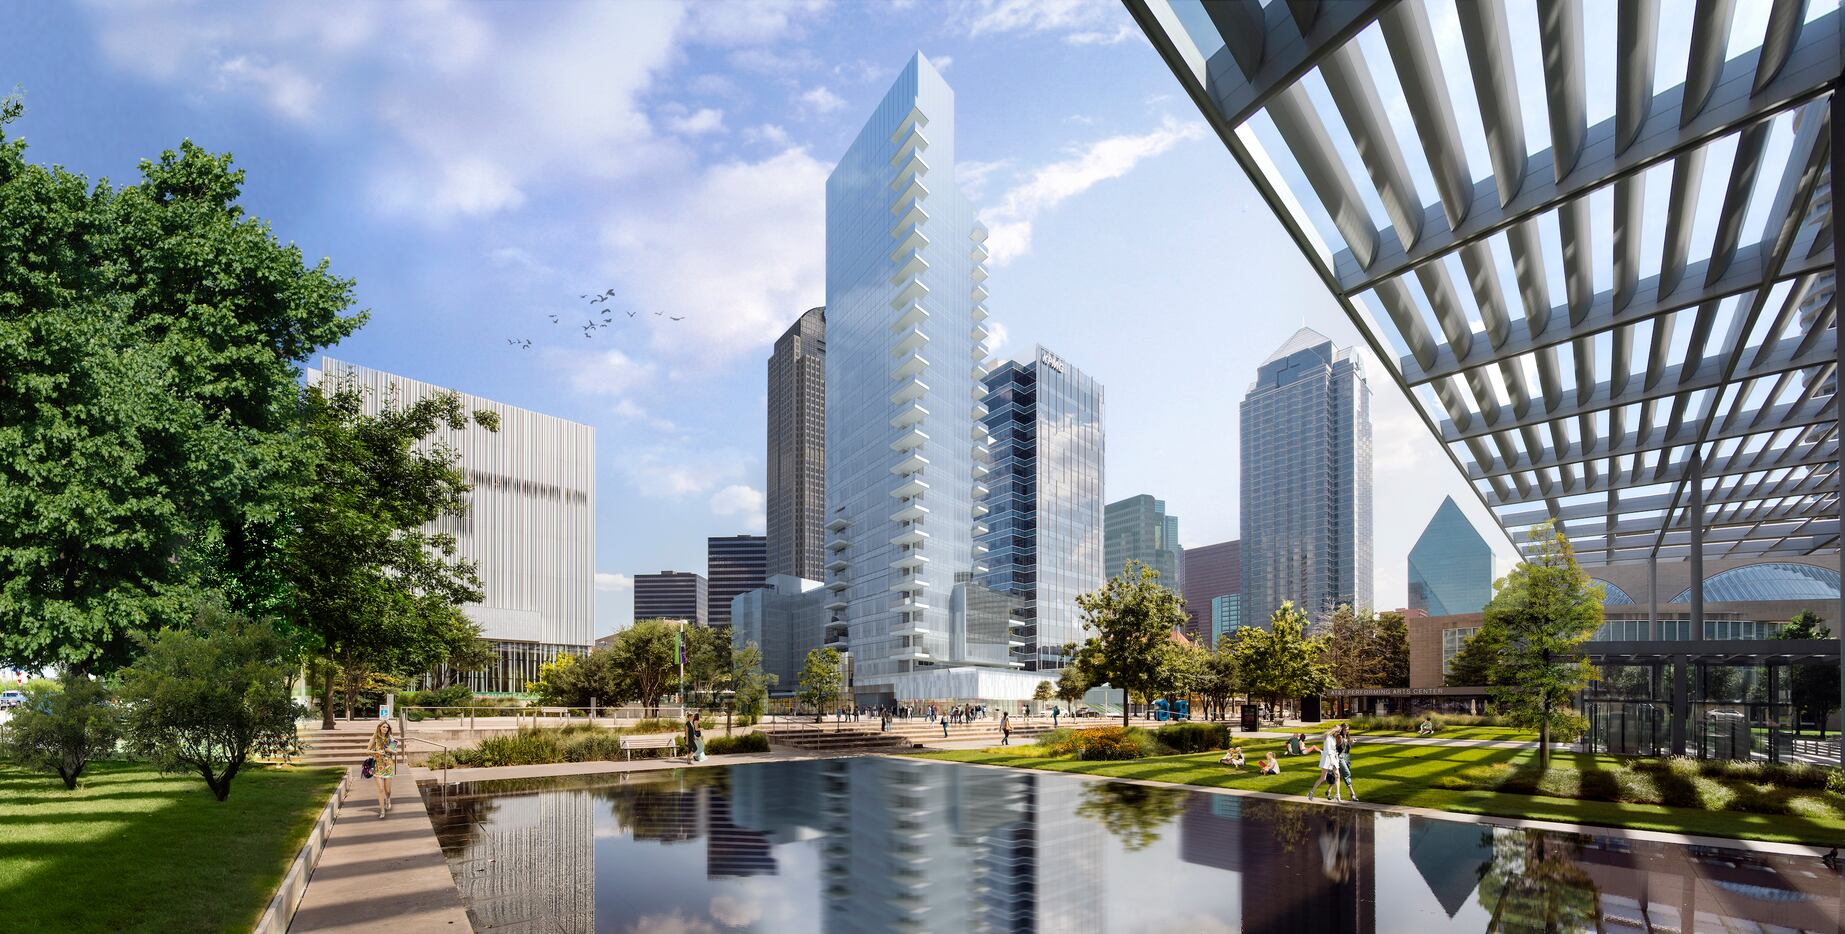 The 28-story high-rise is in downtown Dallas' Arts District.